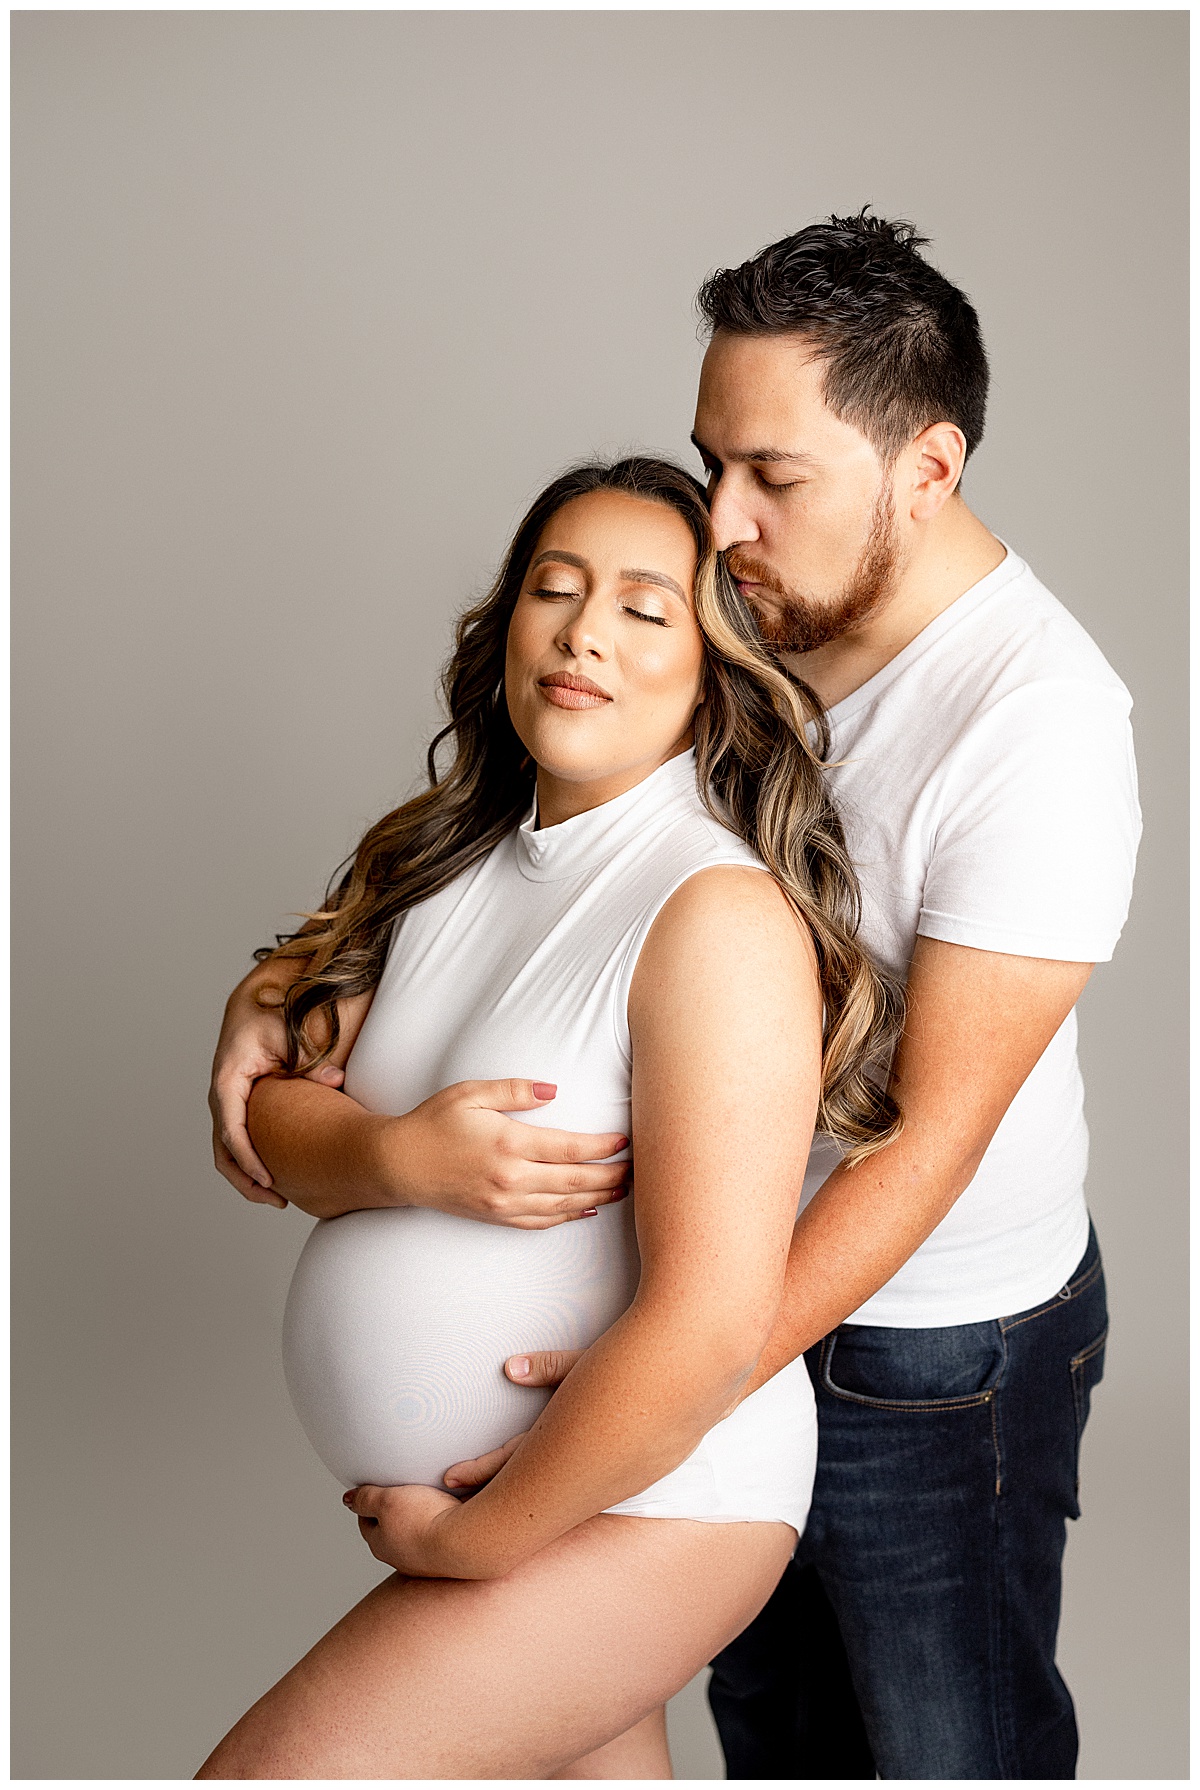 Dad loves on mom for Studio Maternity Session